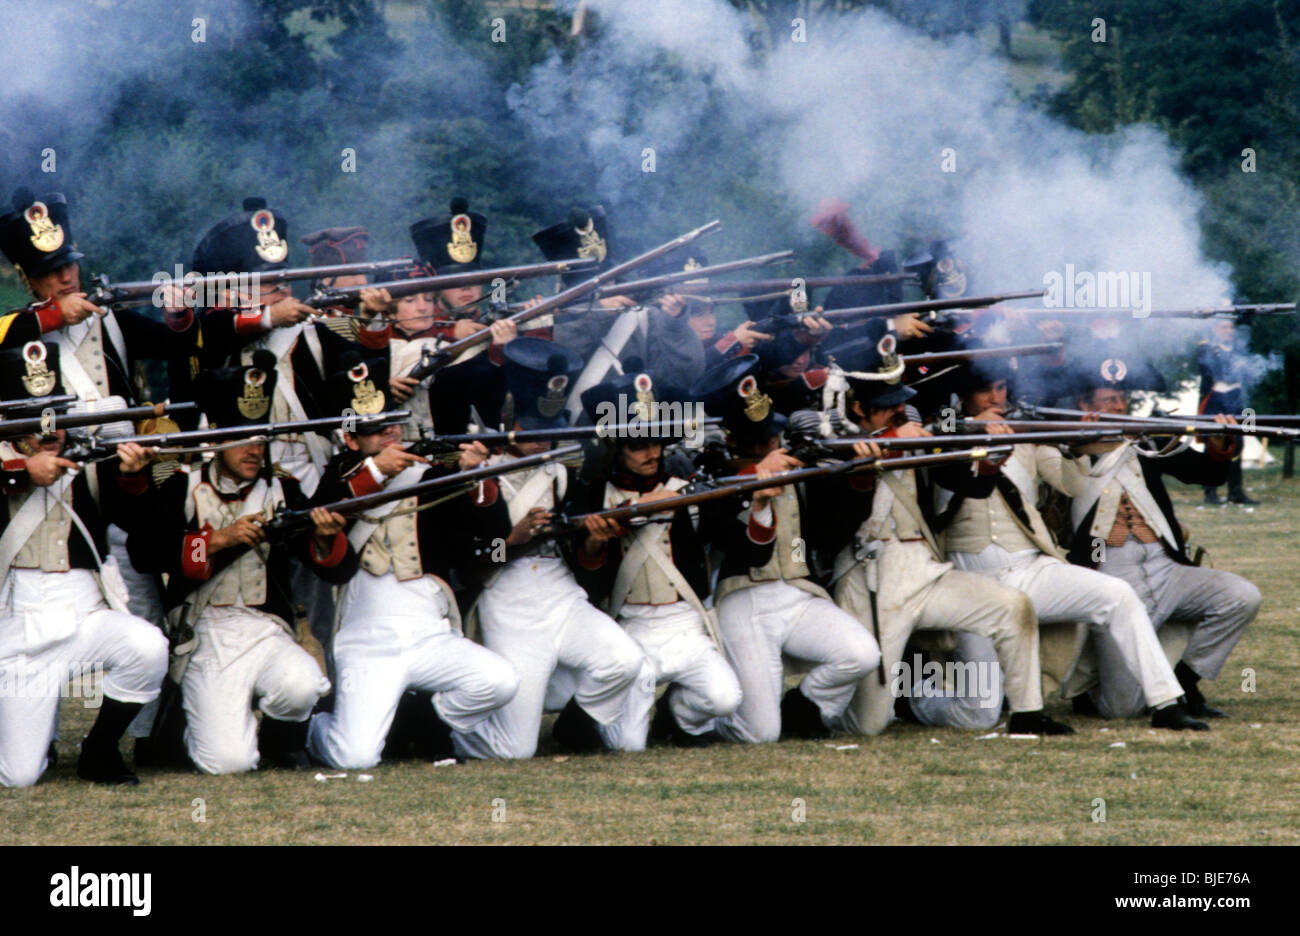 French Napoleonic Infantry, 1815 musket muskets rifle rifles volley firing smoke gunpowder foot soldiers regiment regiments Stock Photo